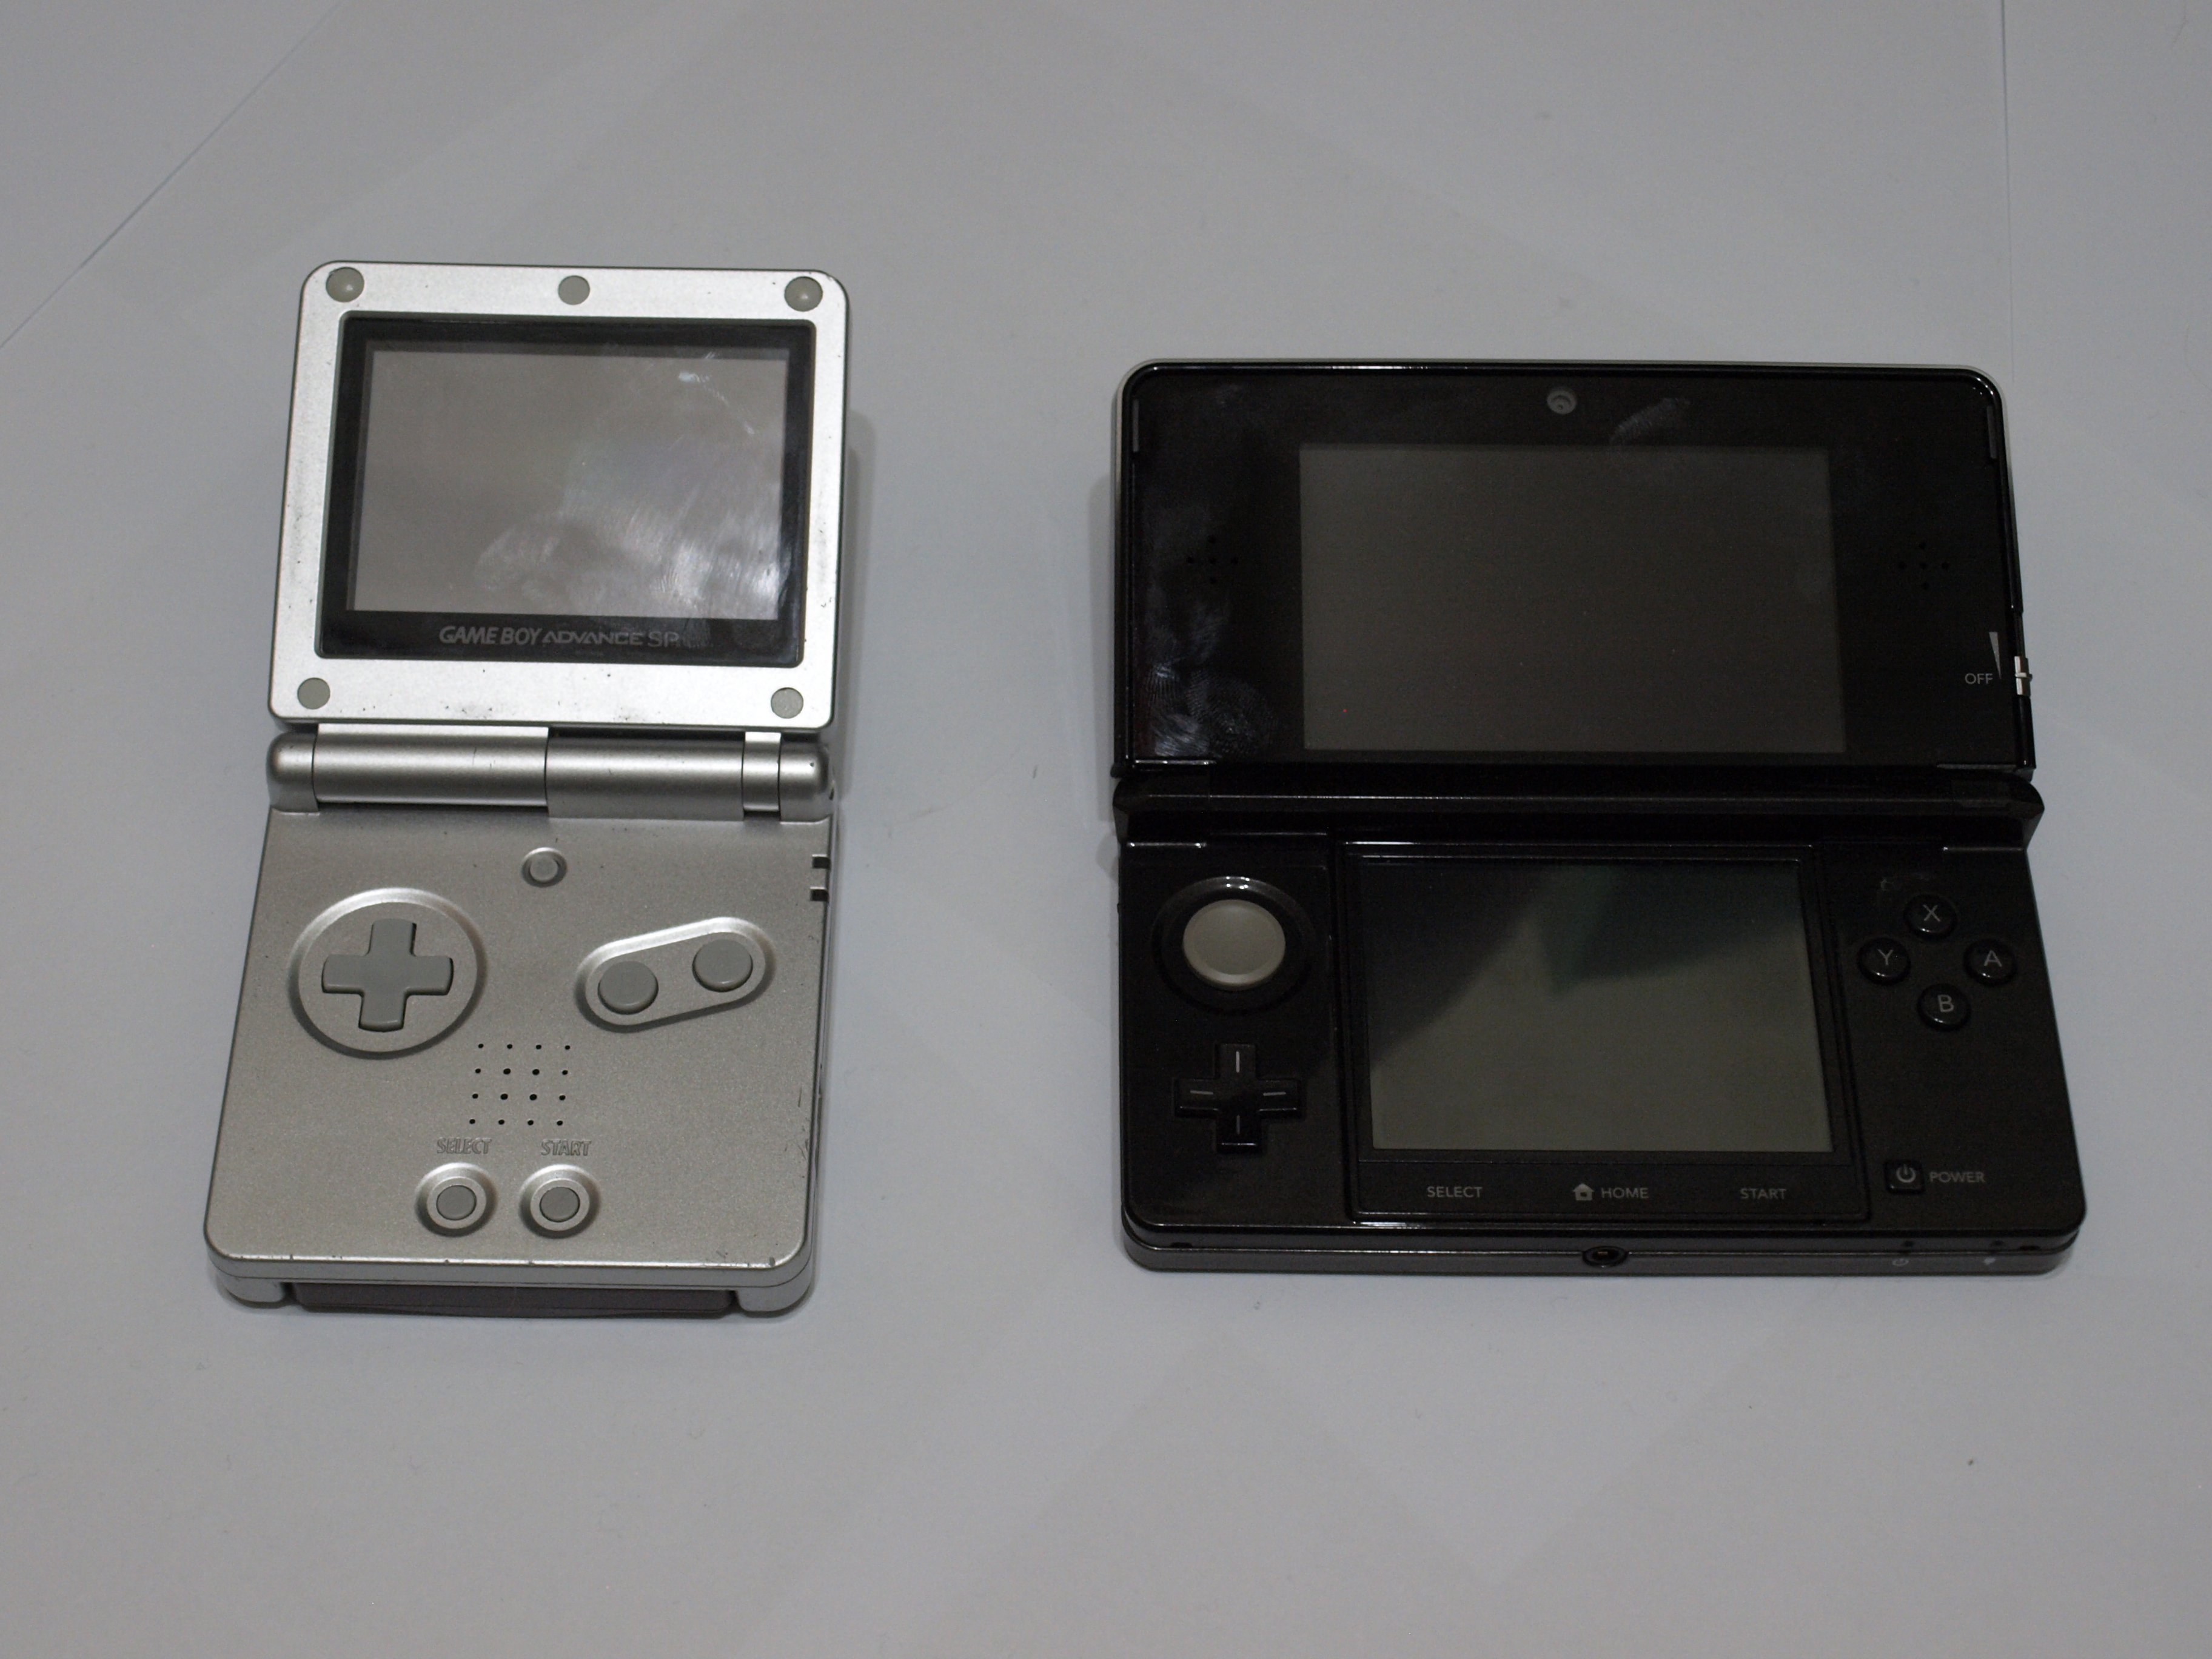 File:Nintendo 3DS and Game Boy Advance SP.jpg - Wikimedia Commons